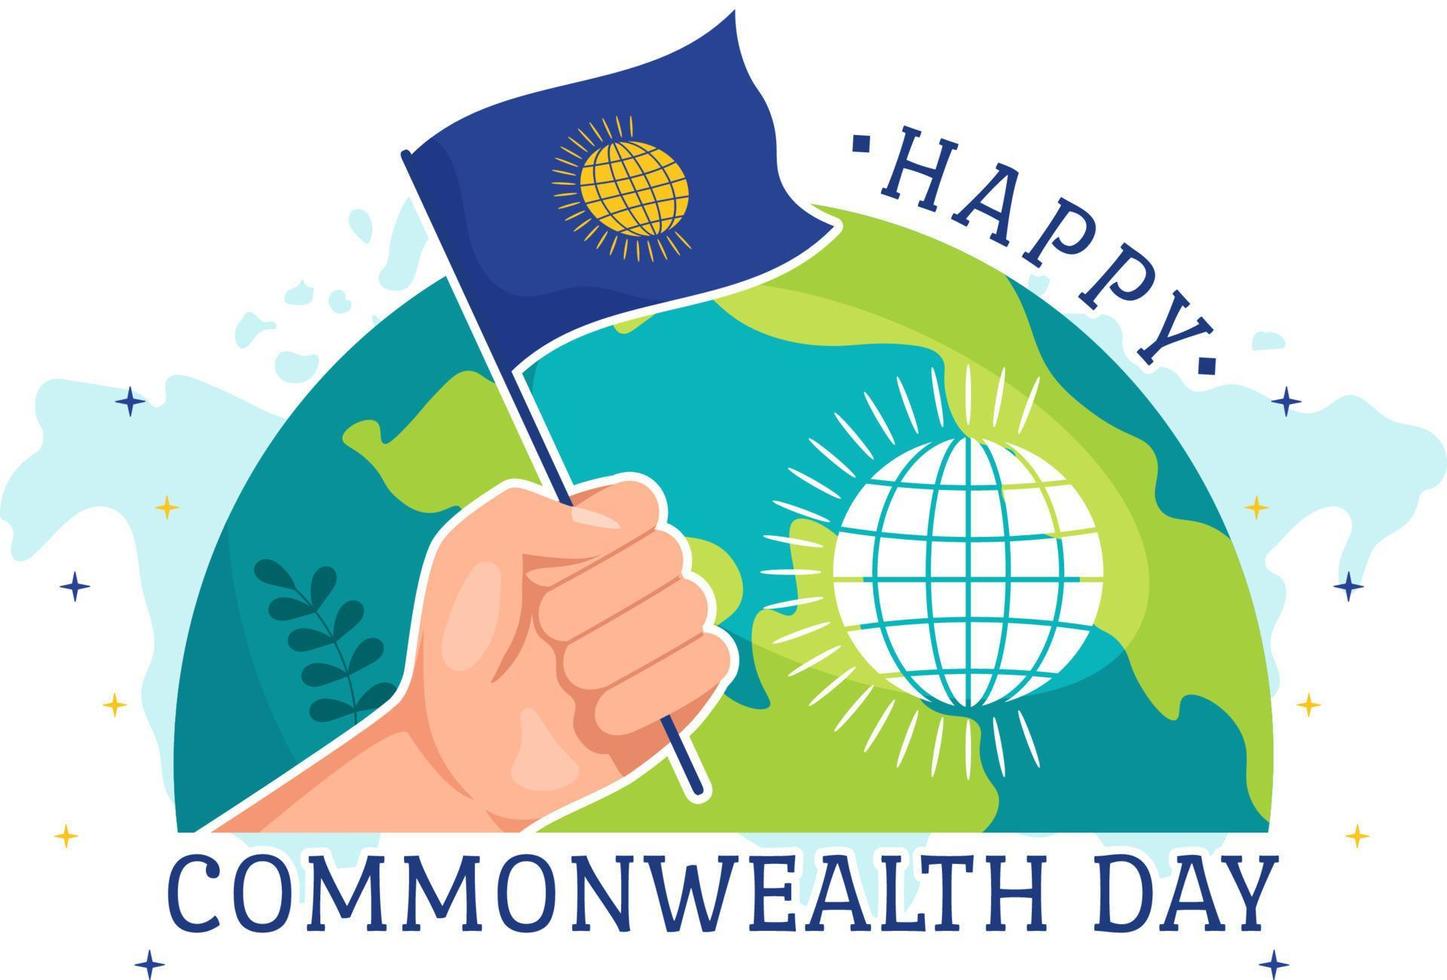 Commonwealth of Nations Day on 24 may Illustration with Helps Guide Activities by Commonwealths Organizations in Flat Hand Drawn Templates vector